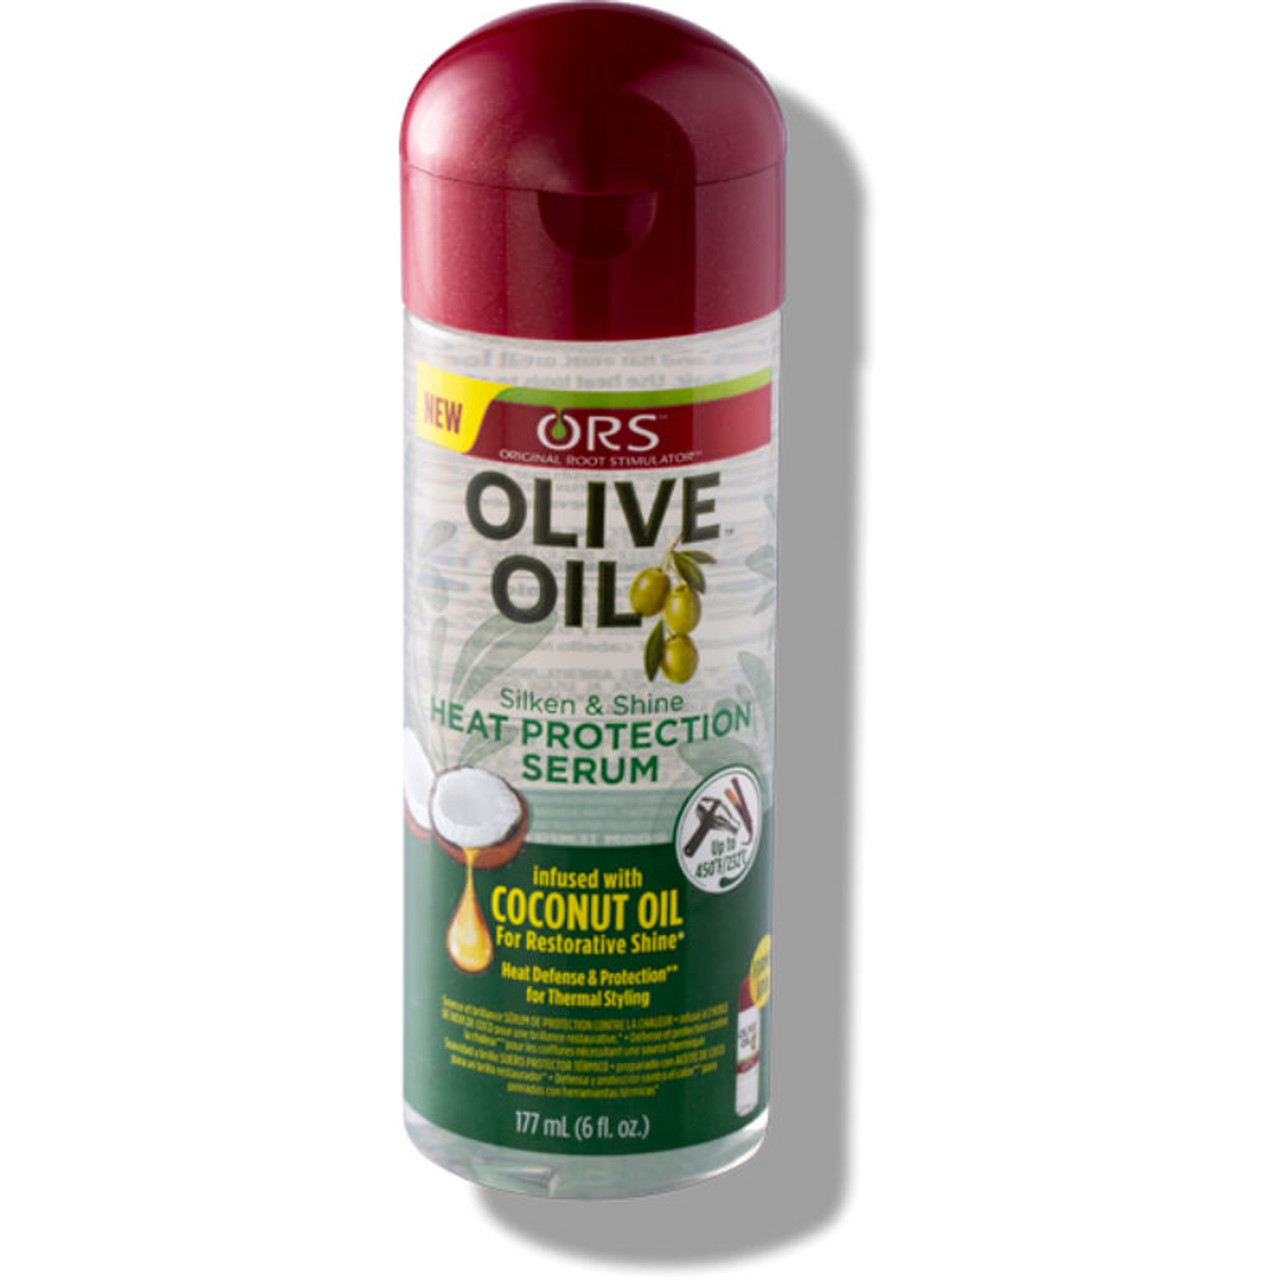 ORS Olive Oil Silken & Shine Heat Protection Serum (6 oz.) - NaturallyCurly